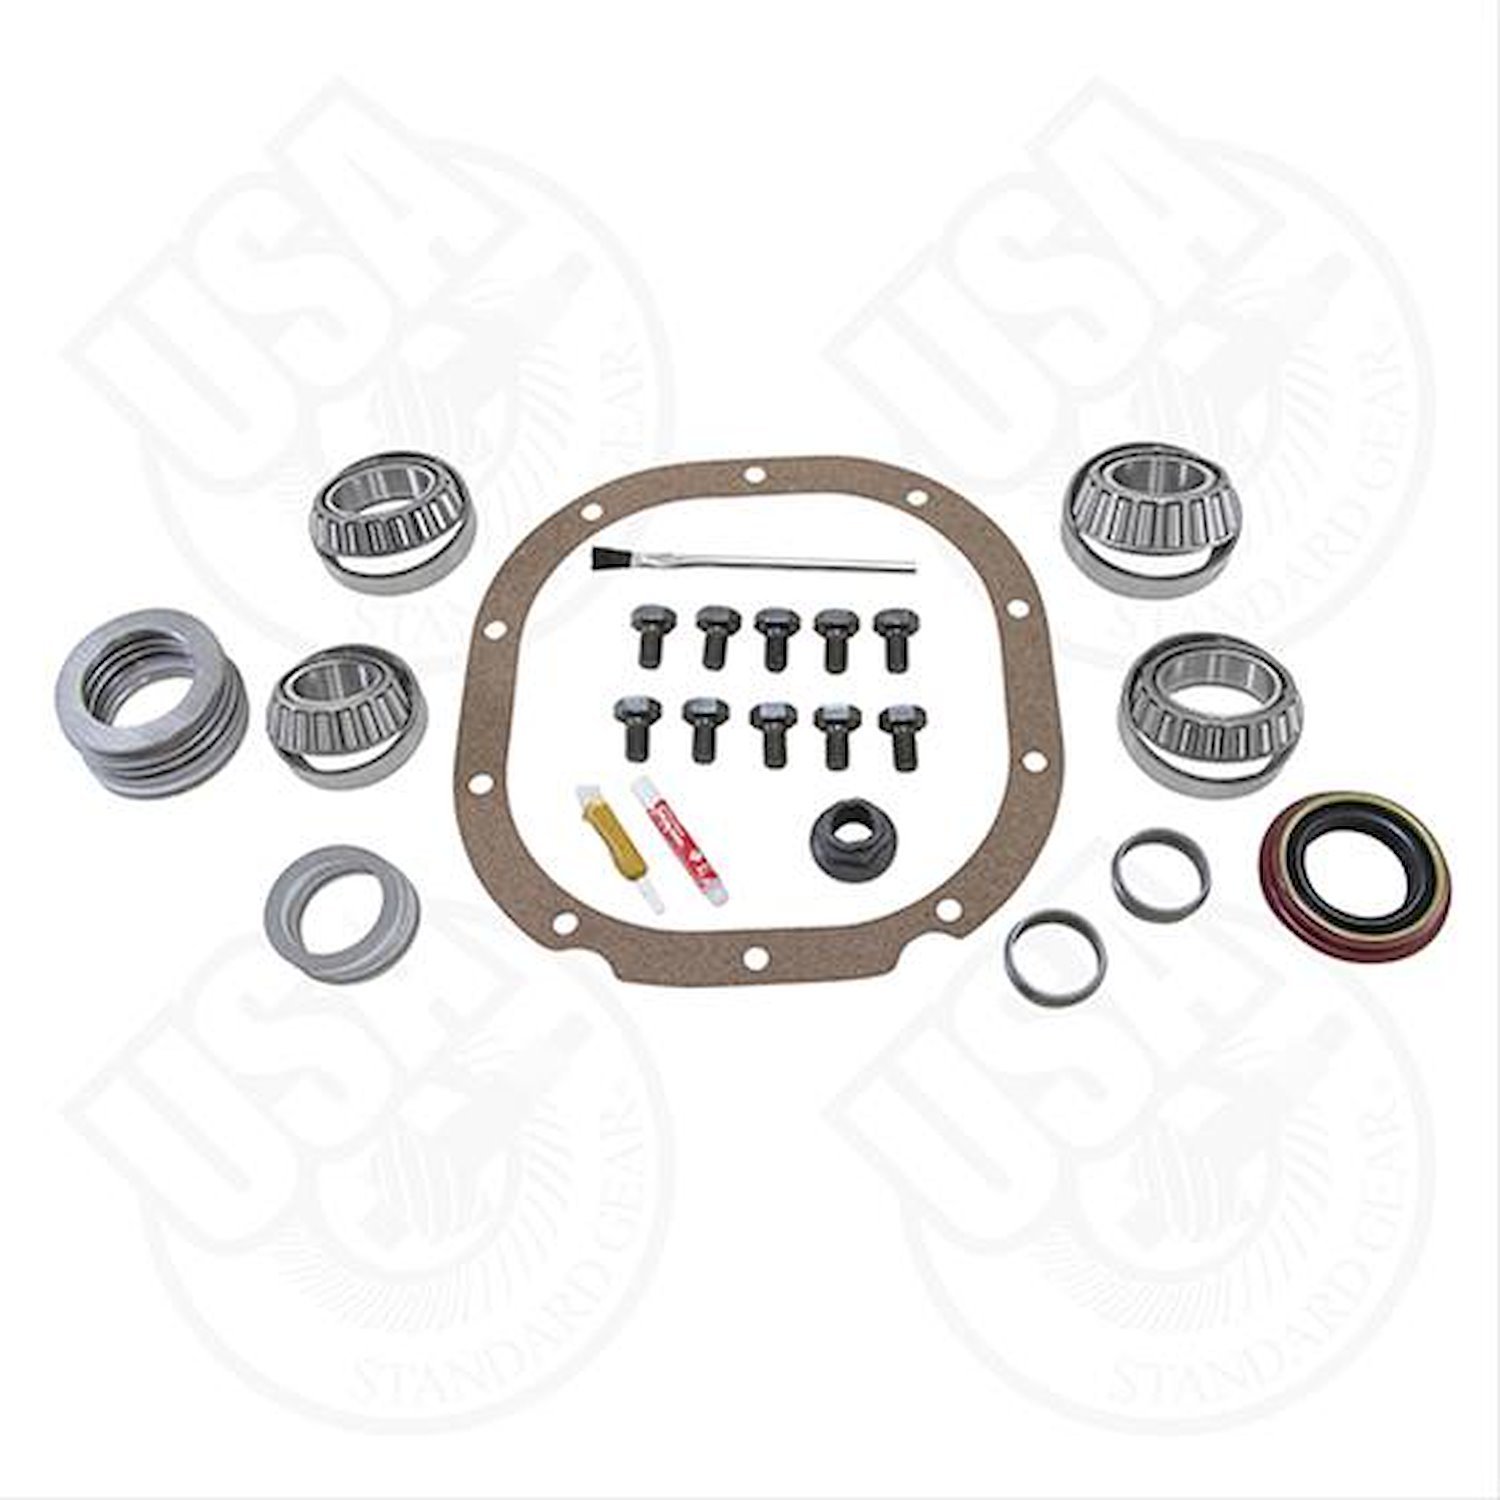 USA Standard Master Overhaul Kit 2010-Up Ford Mustang 8.8" Differential